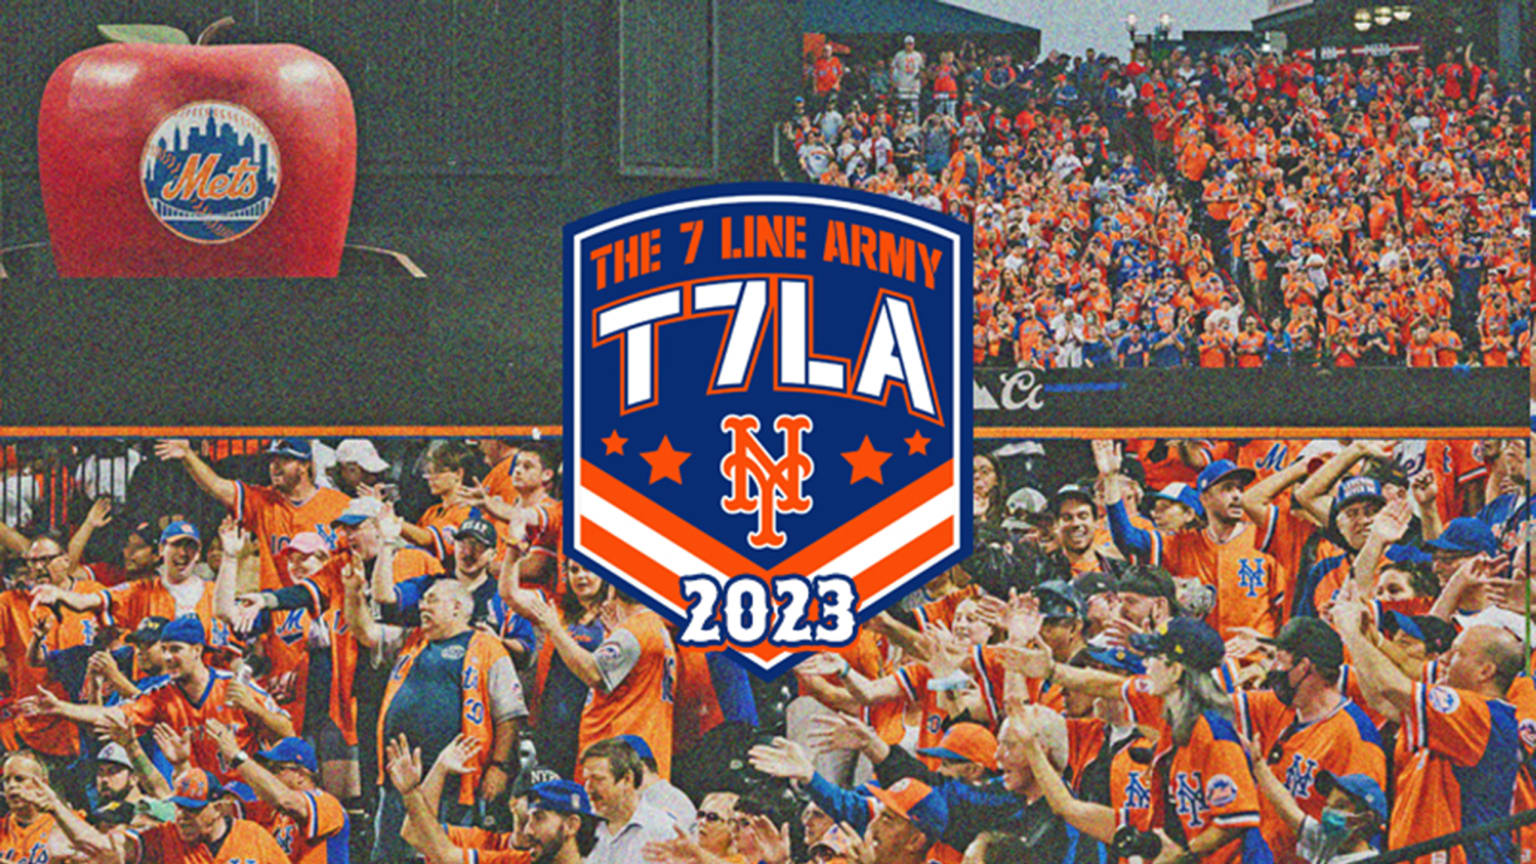 THE 7 LINE ARMY SPRING TRAINING 2022!